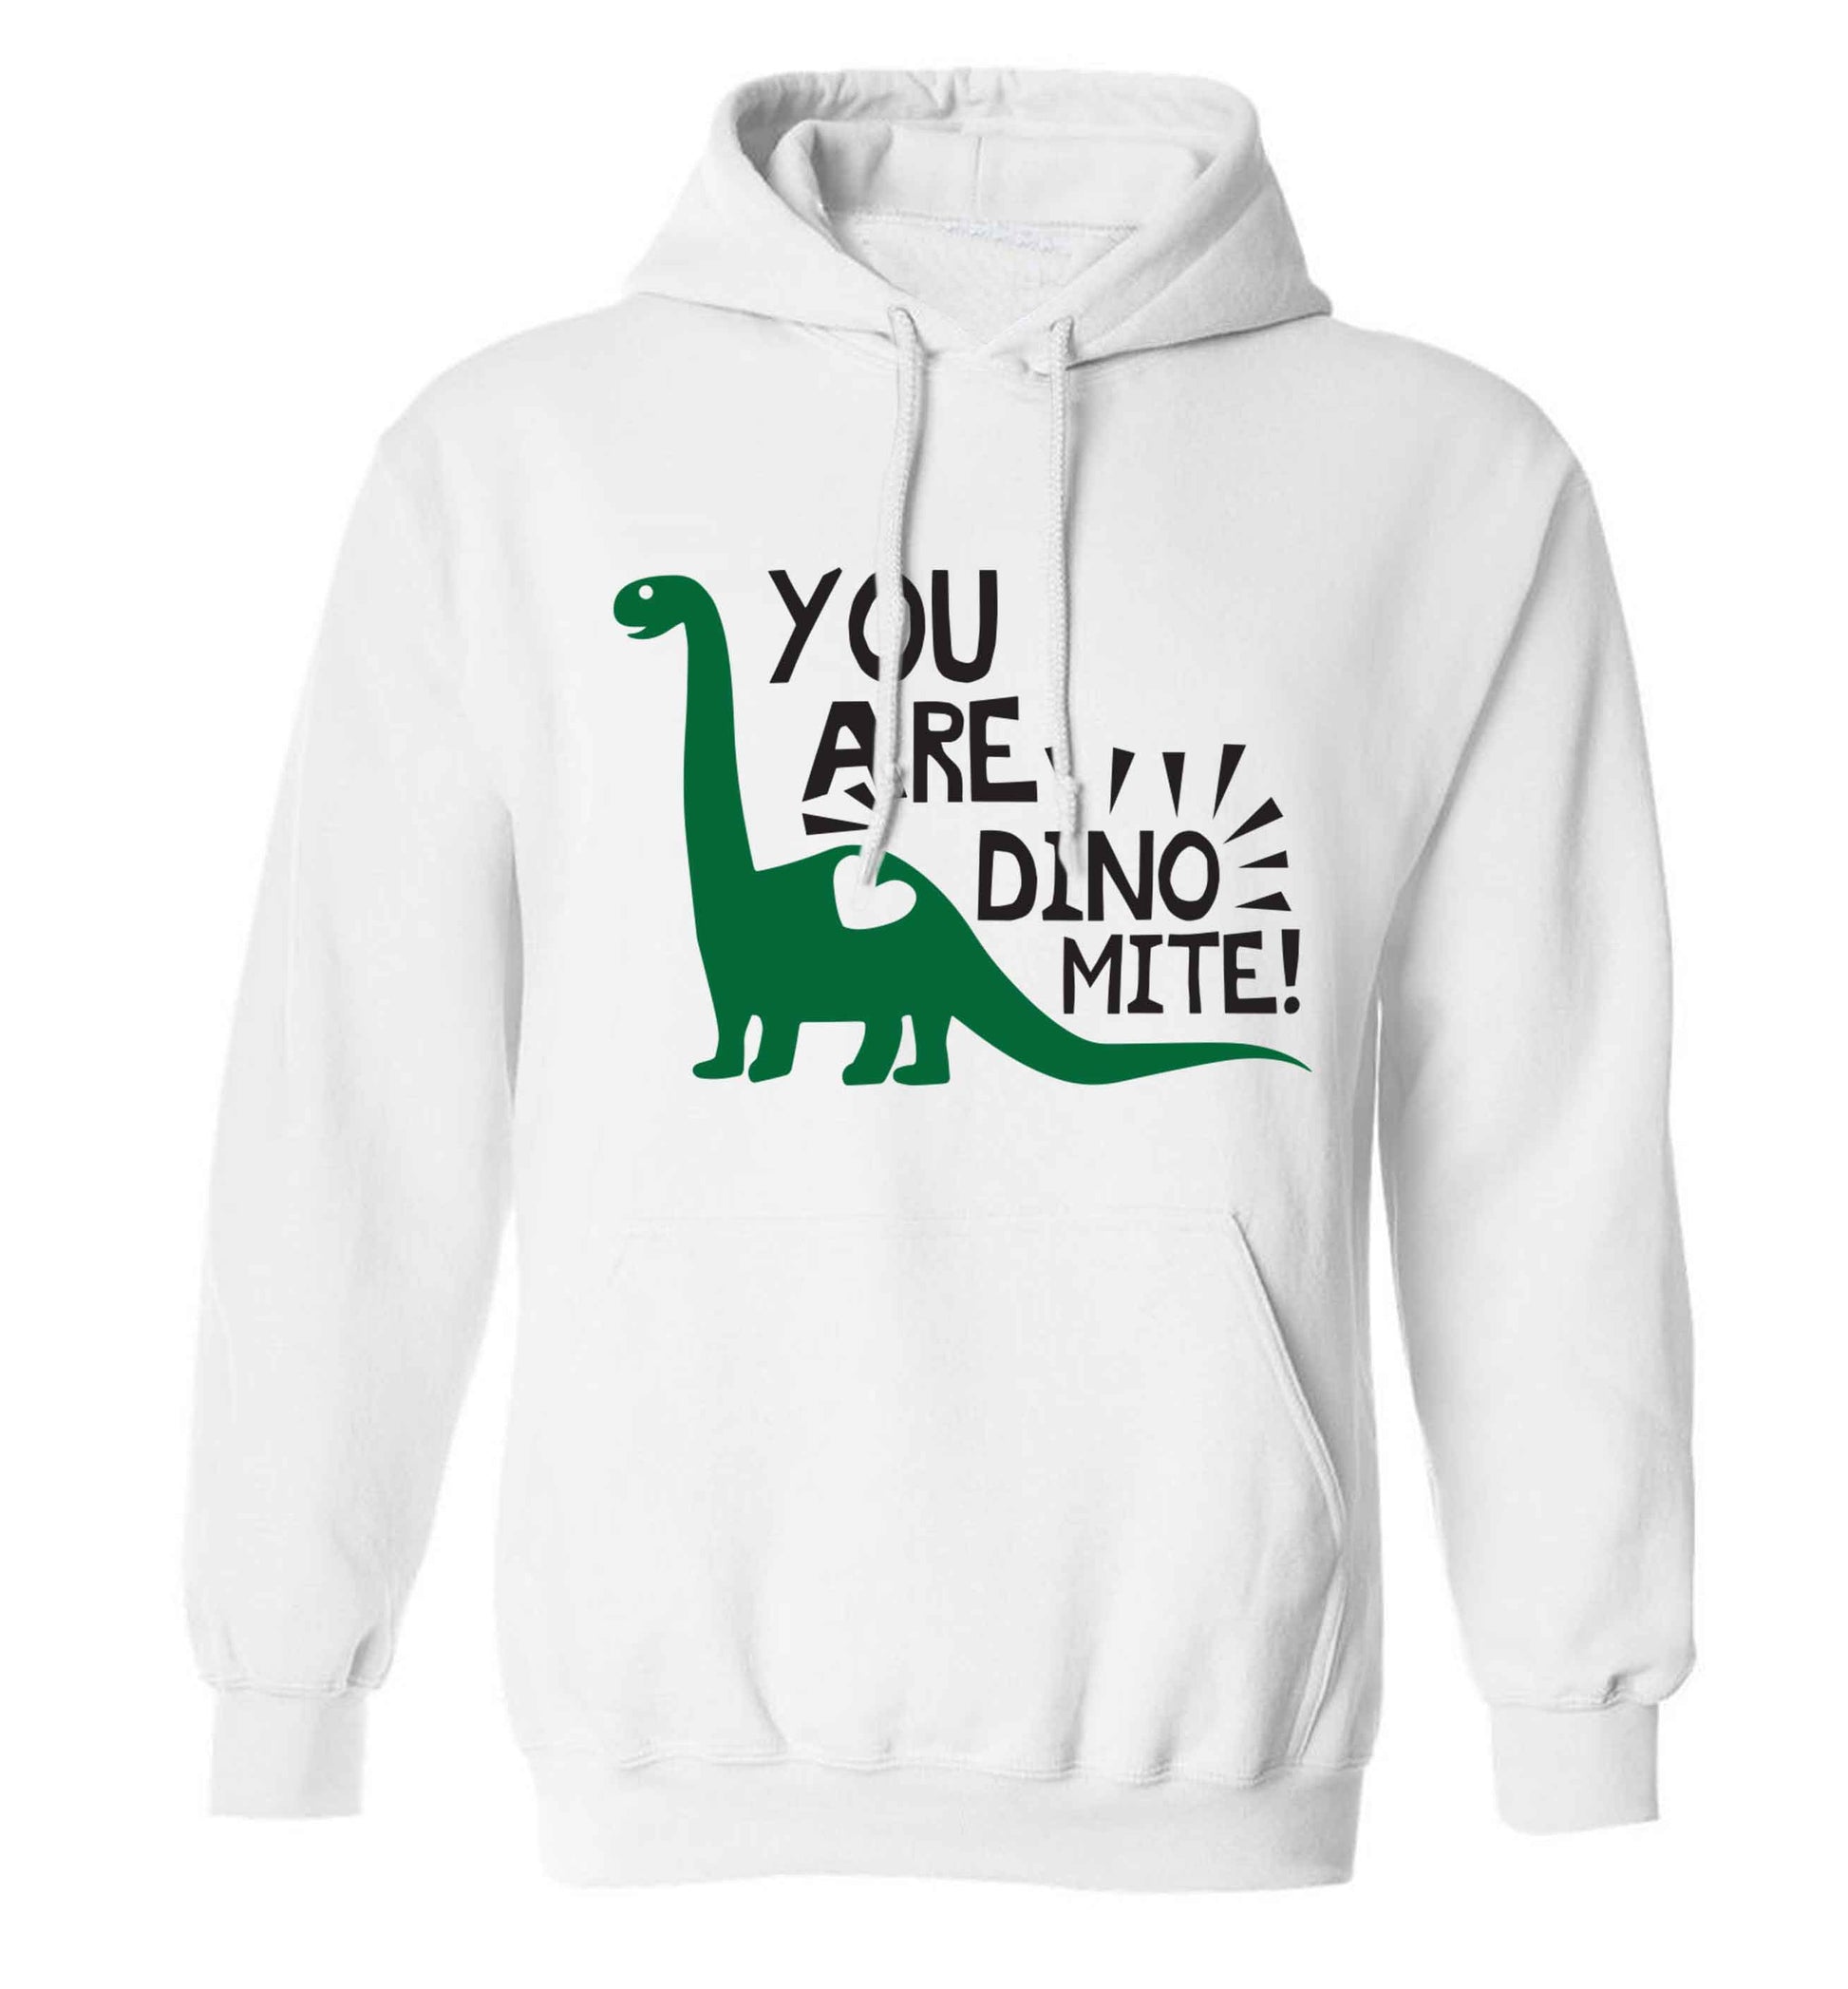 You are dinomite! adults unisex white hoodie 2XL